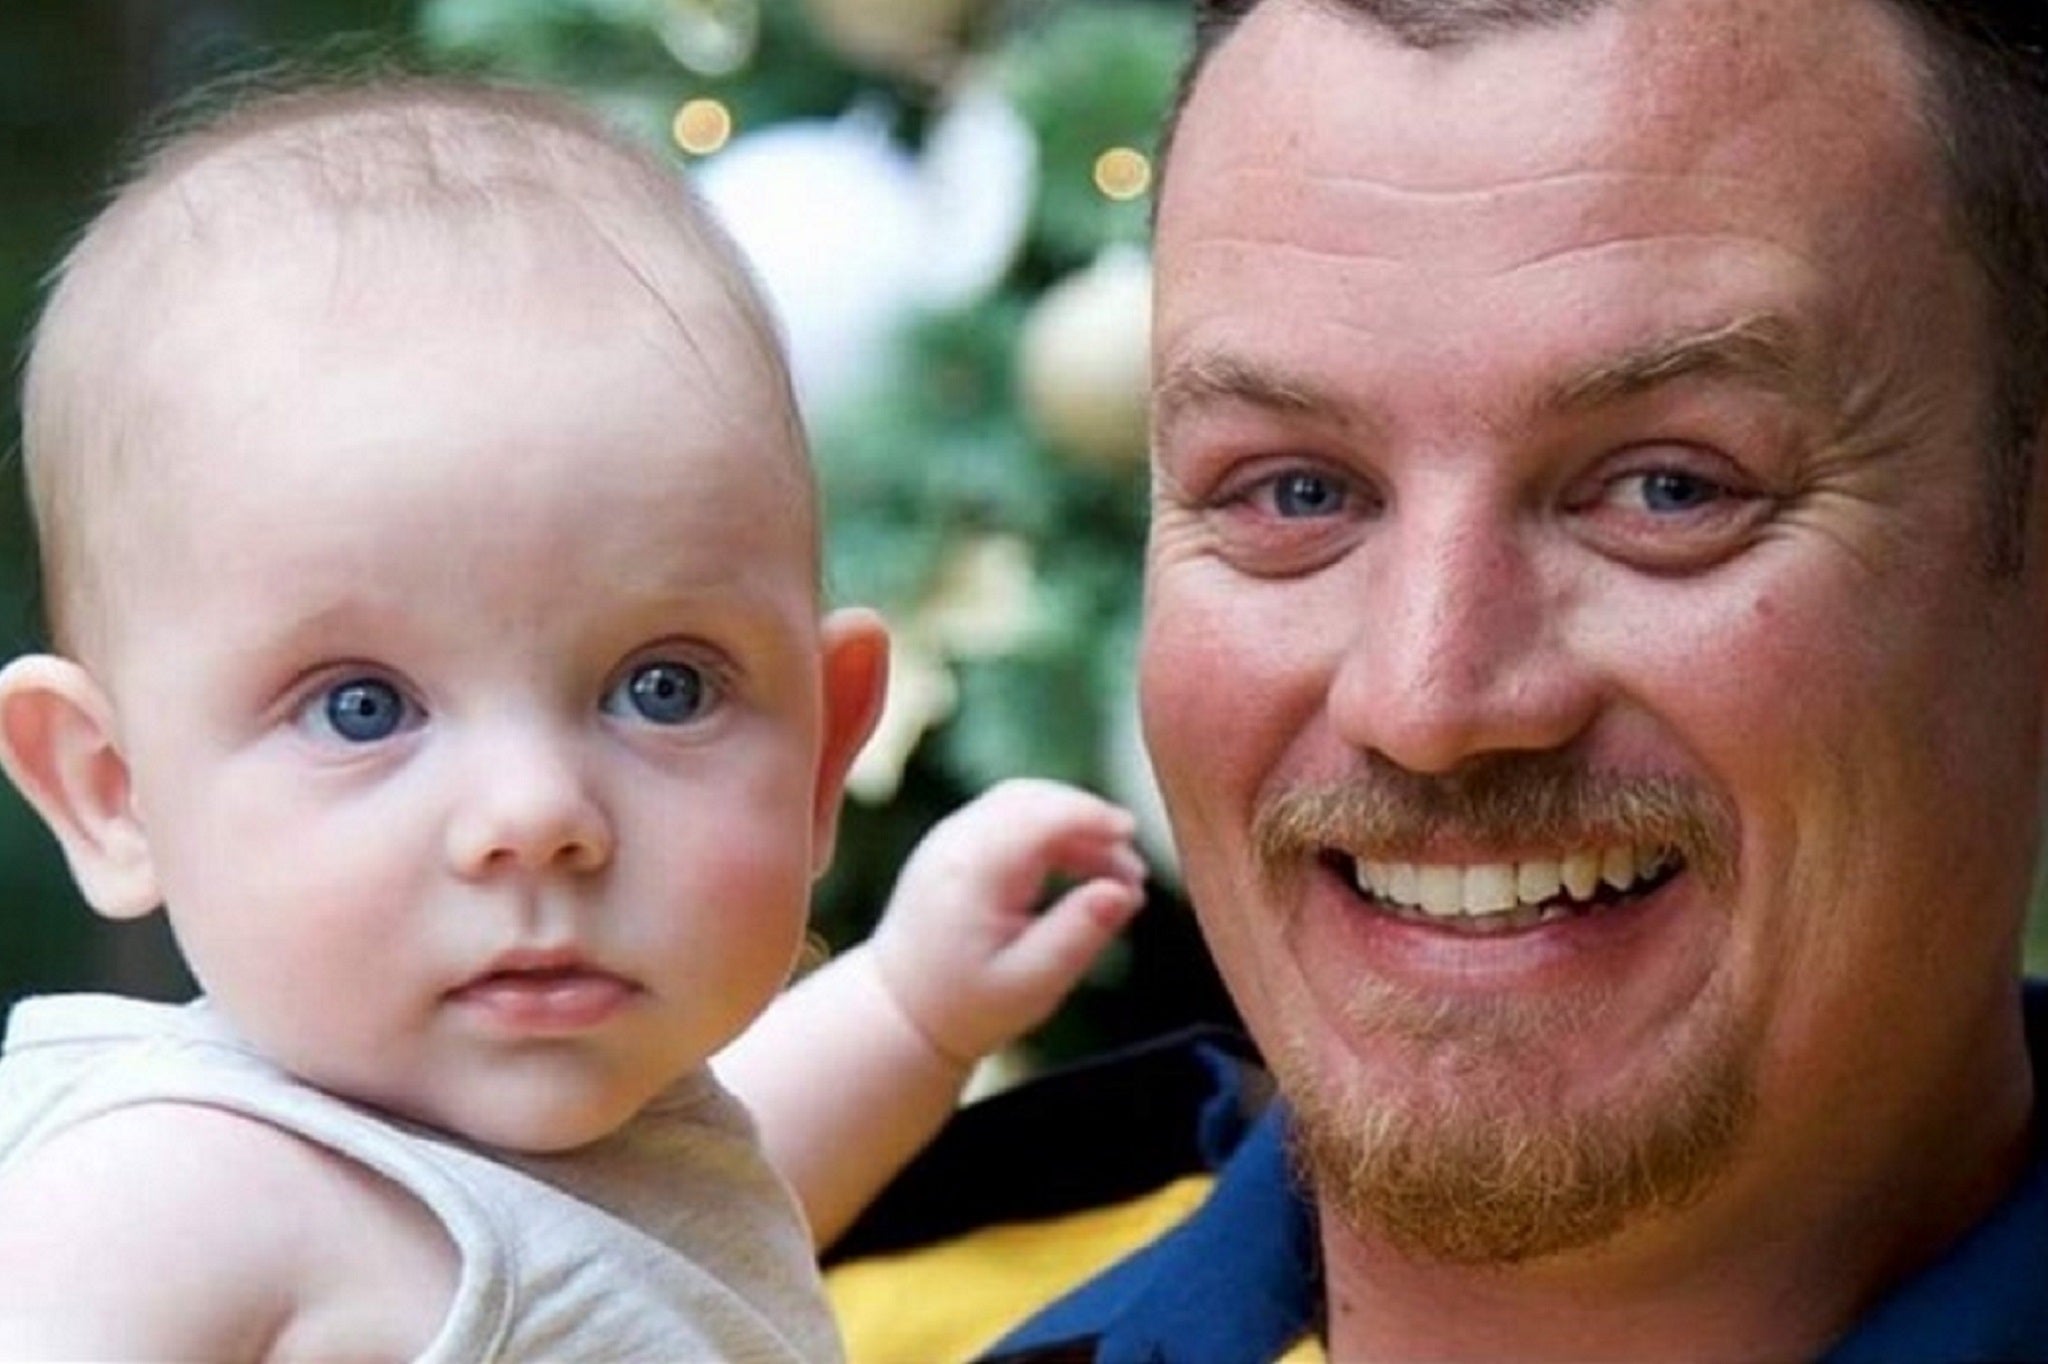 Geoffrey Keaton, 32, deputy captain of Horsley Park Rural Fire Brigade, who was killed on his way to tackle wildfires in New South Wales, Australia, on 19 December, 2019, pictured with his son Harvey.